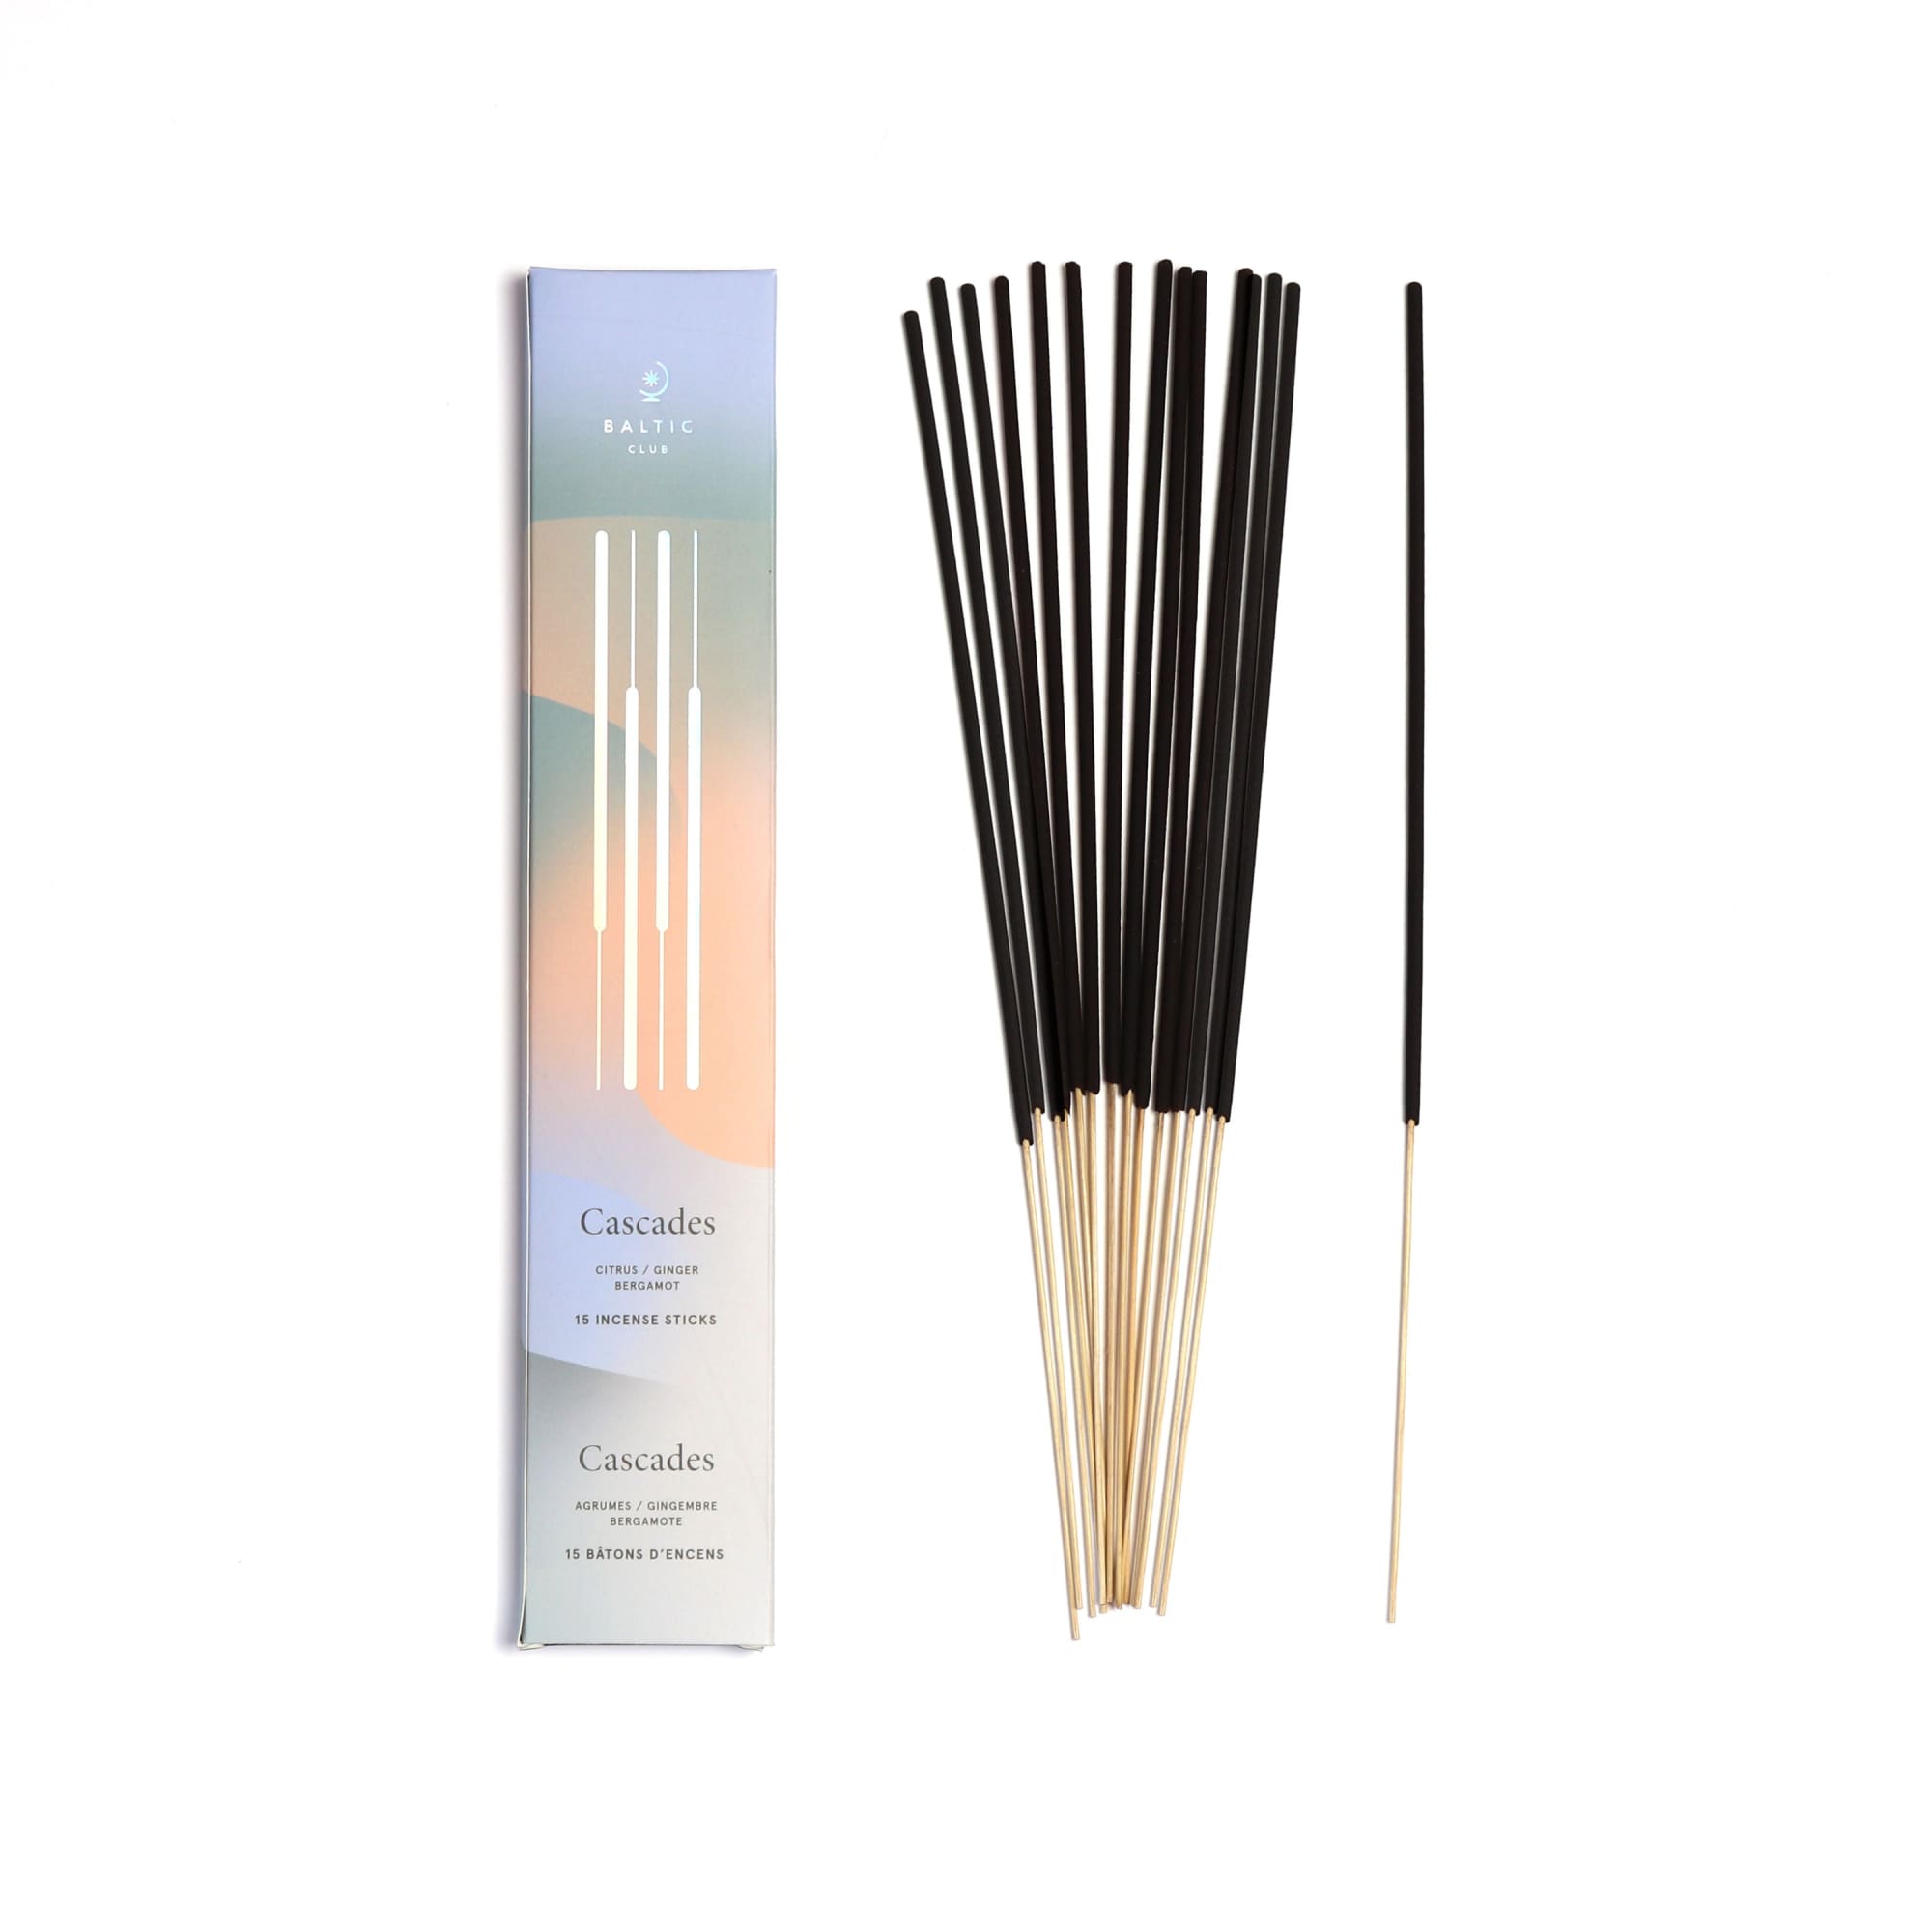 Cascades Incense Sticks box of 15, seen from above